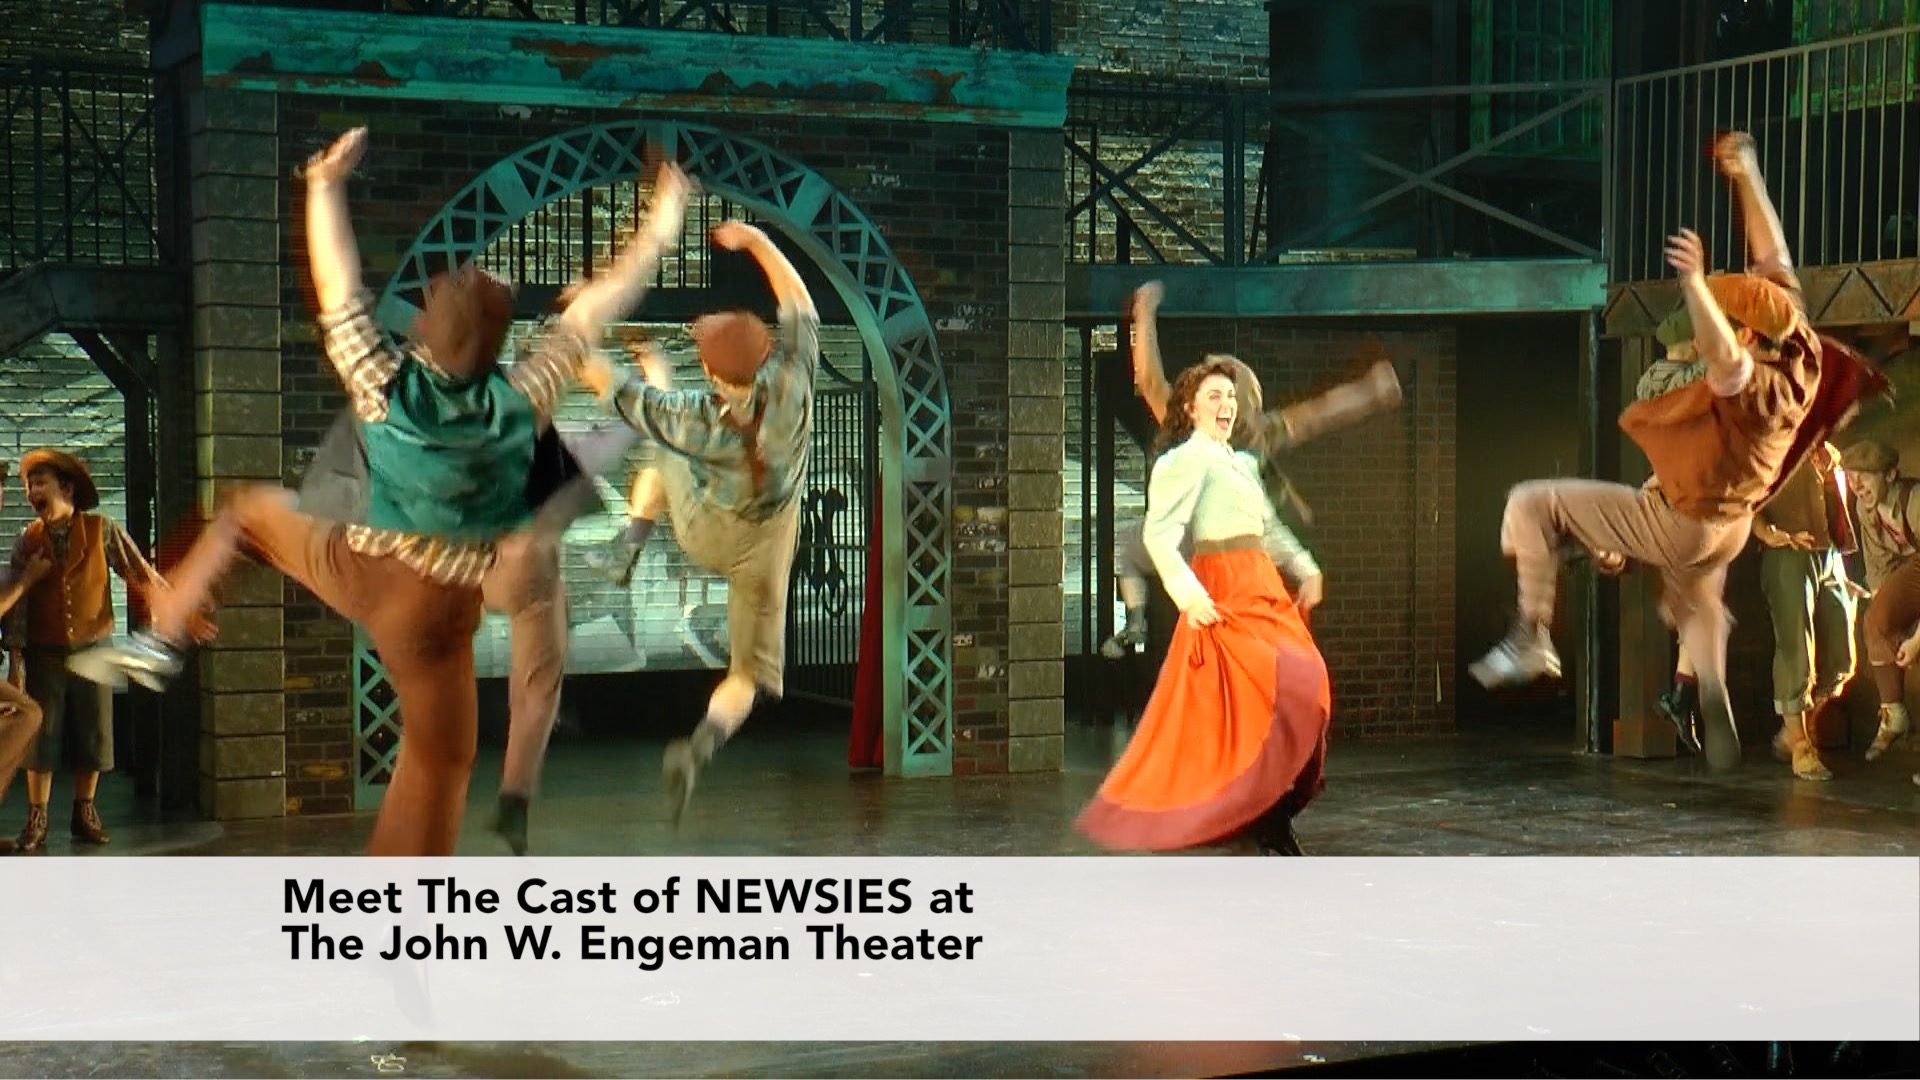 Meet The Cast of Newsies at the Engeman Theater